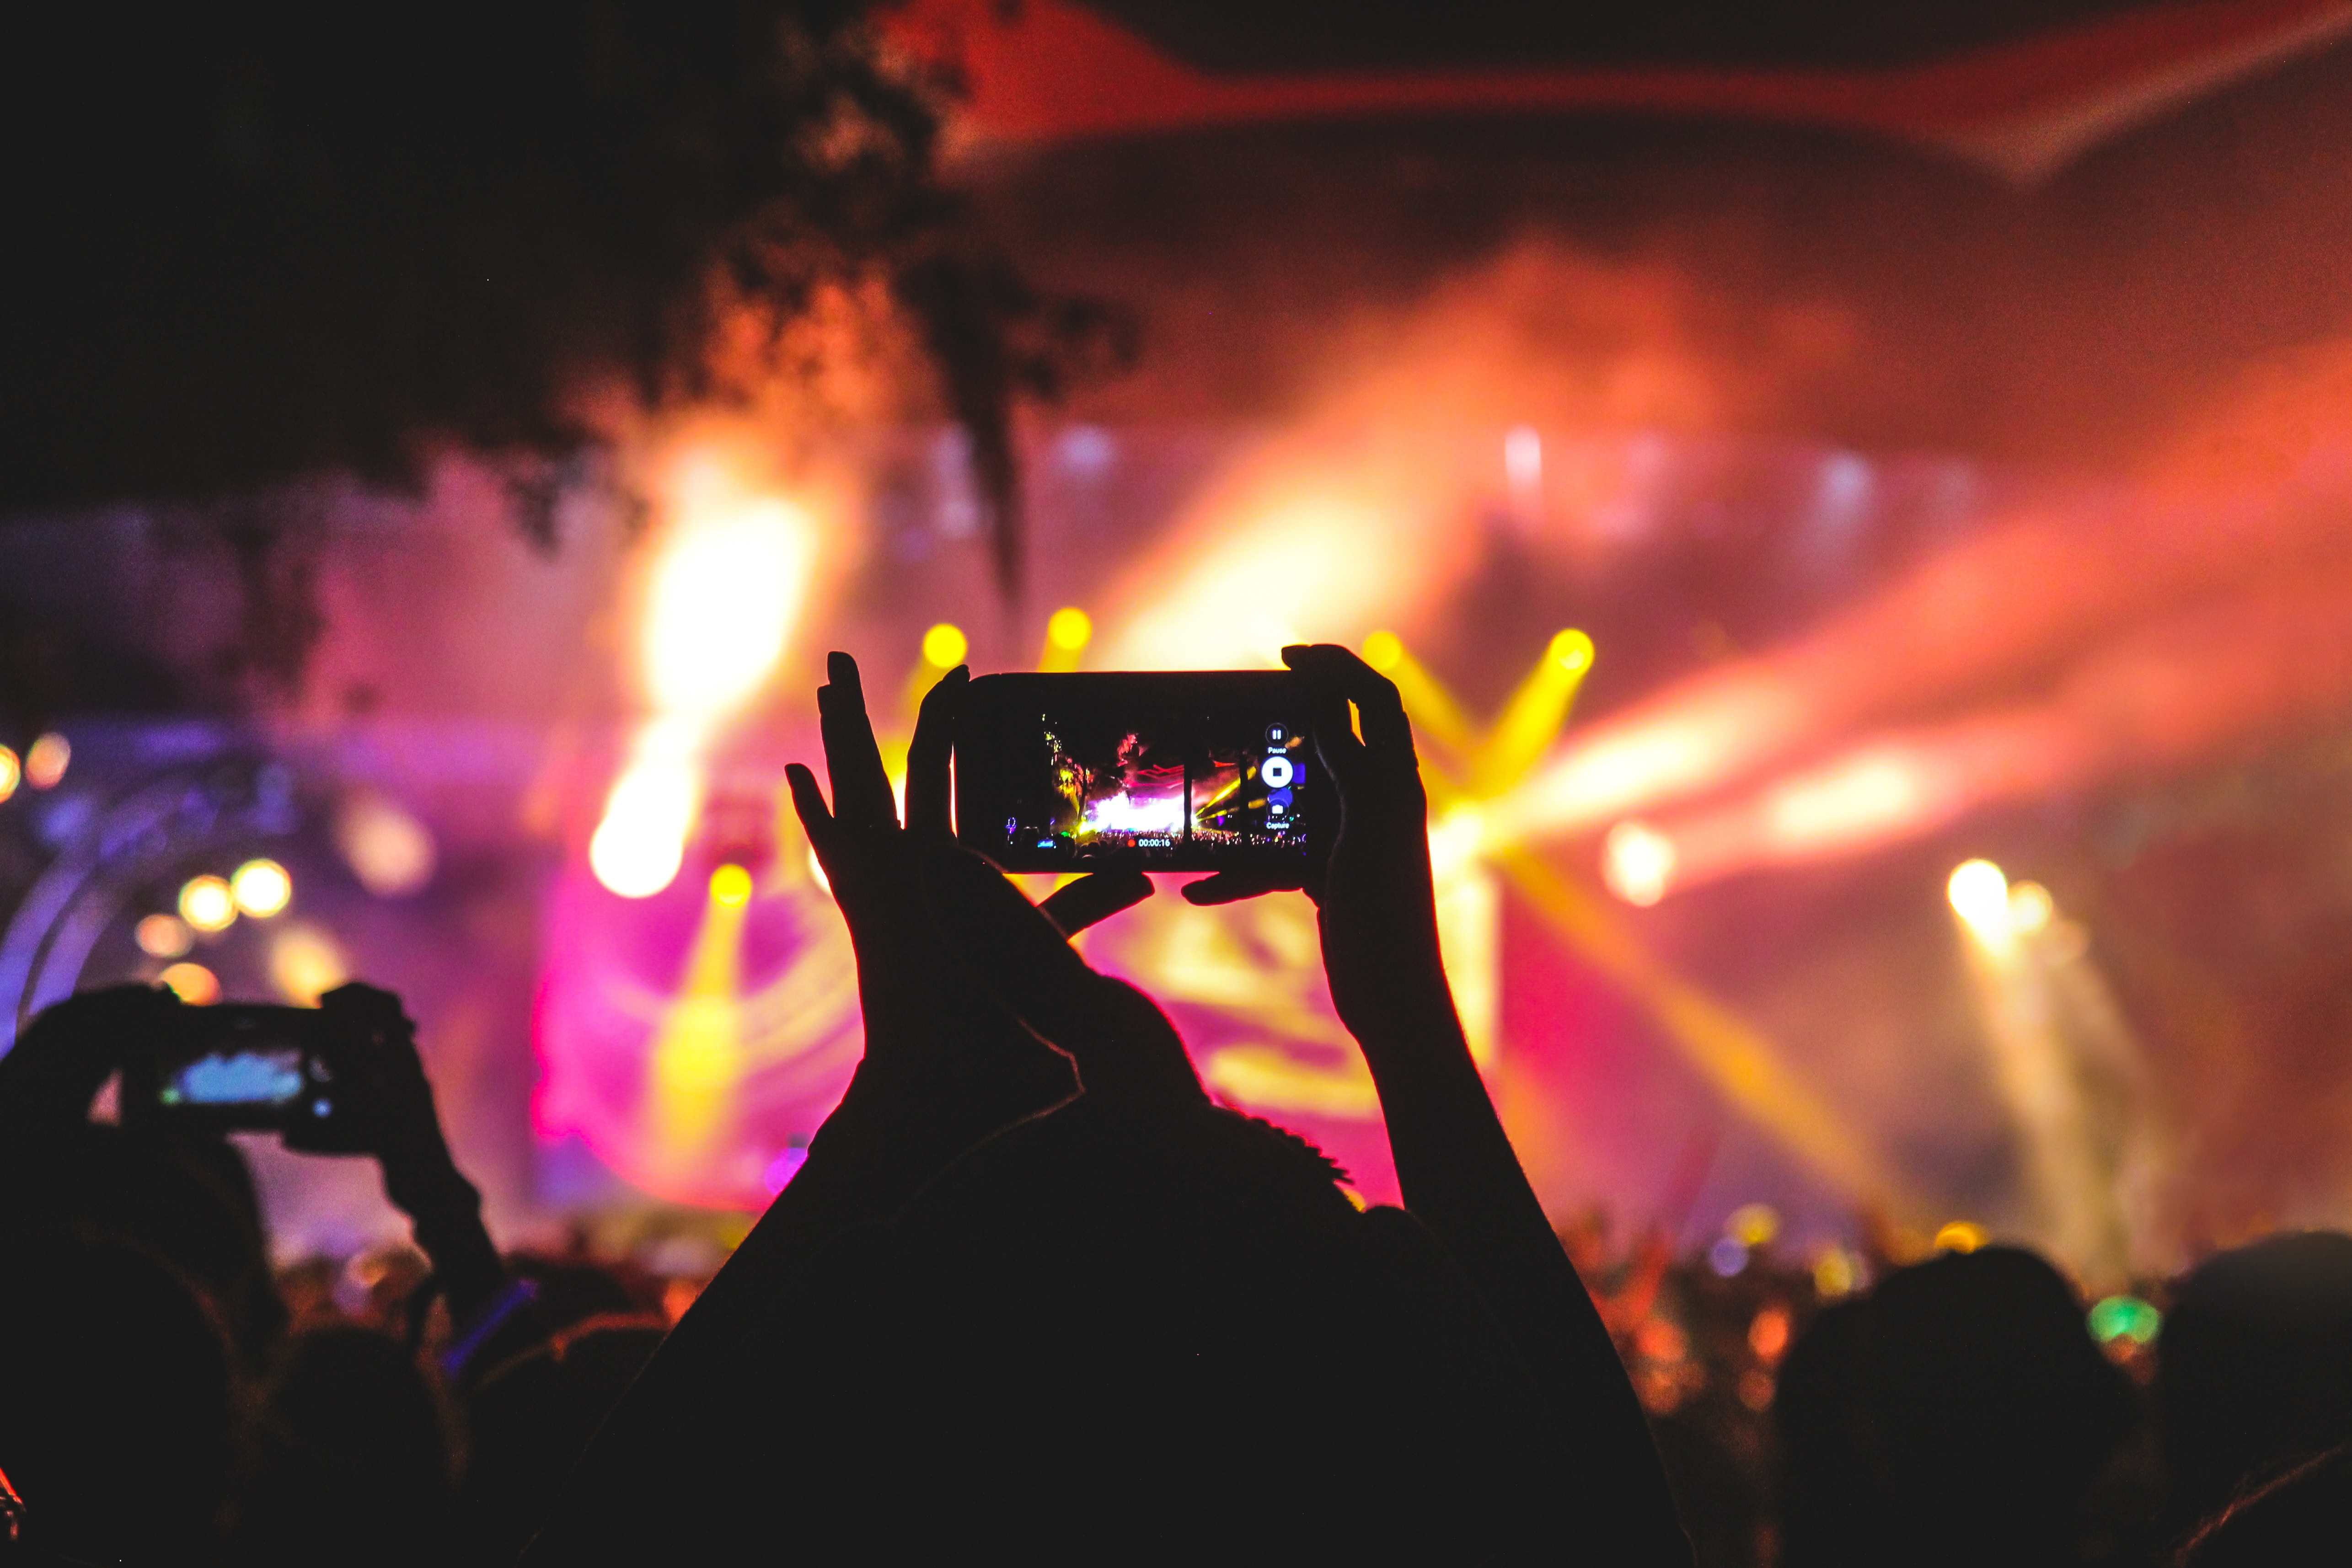 How to protect your phone from getting shattered at a music festival.